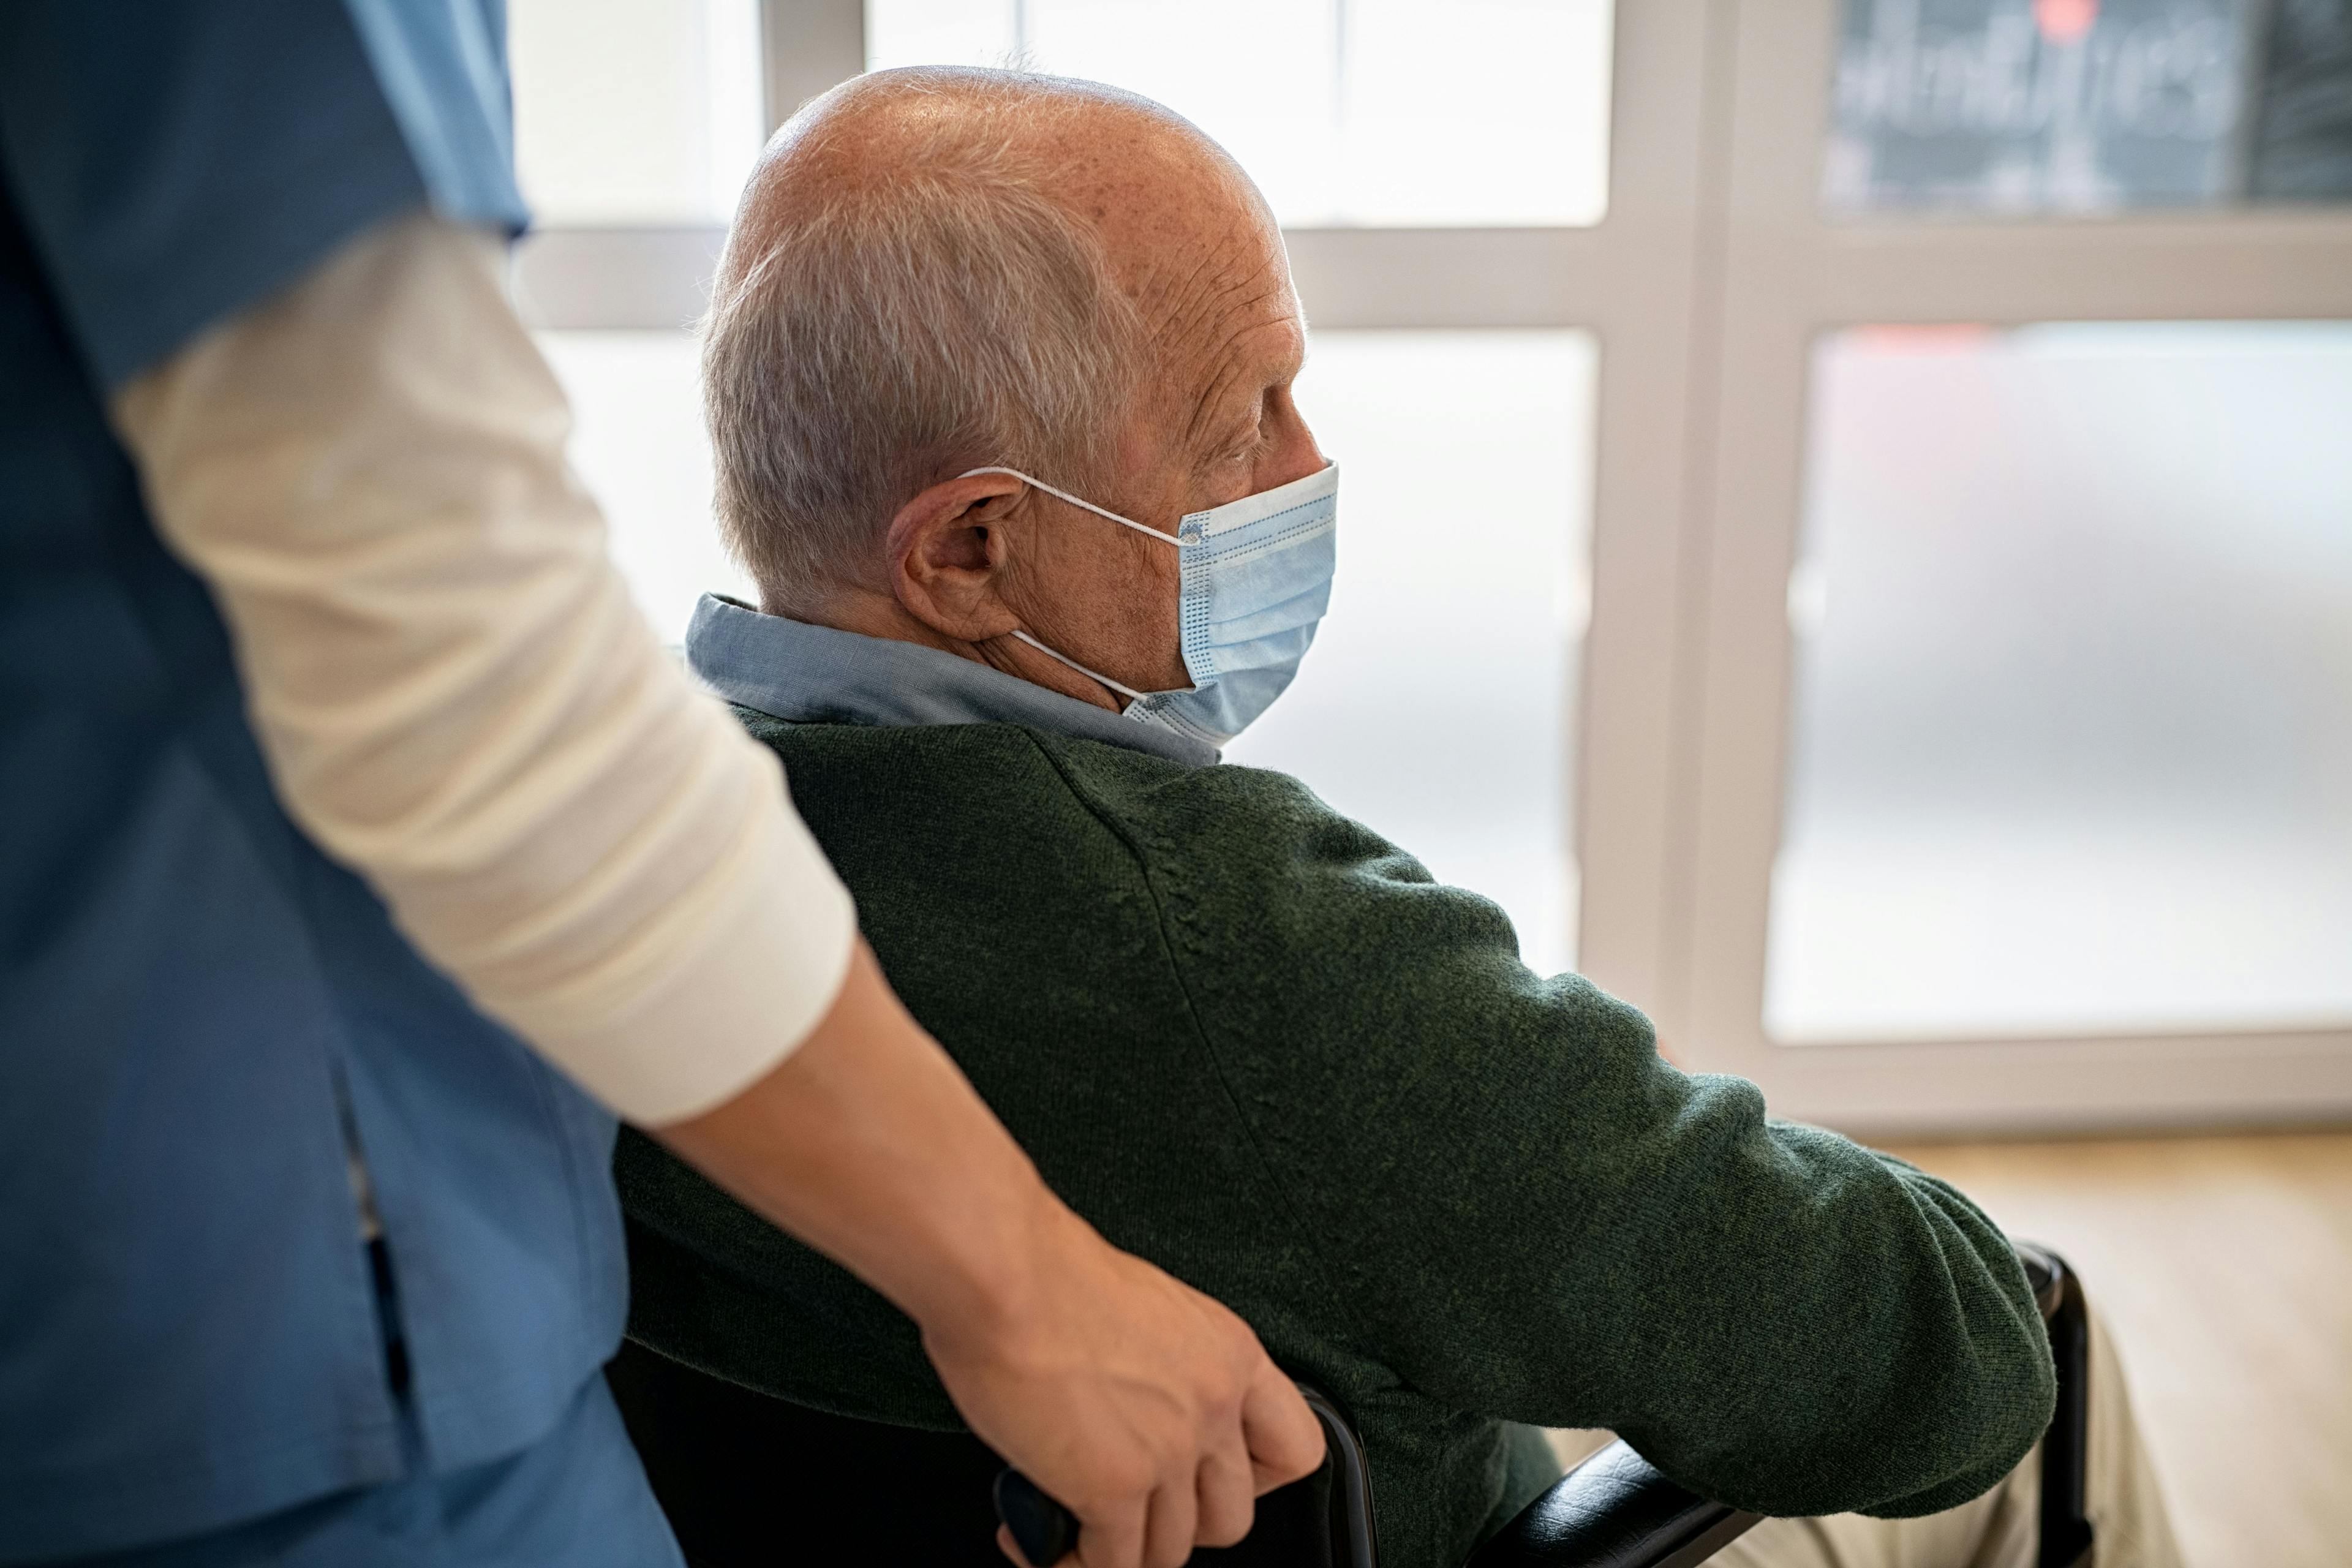 This study found a substantial increase in Alzheimer's-related deaths during the initial year of the pandemic due to limited access to healthcare, social isolation, and disrupted care routines. However, the second year brought positive developments with prevention strategies and vaccinations, leading to a substantial decline in excess deaths.